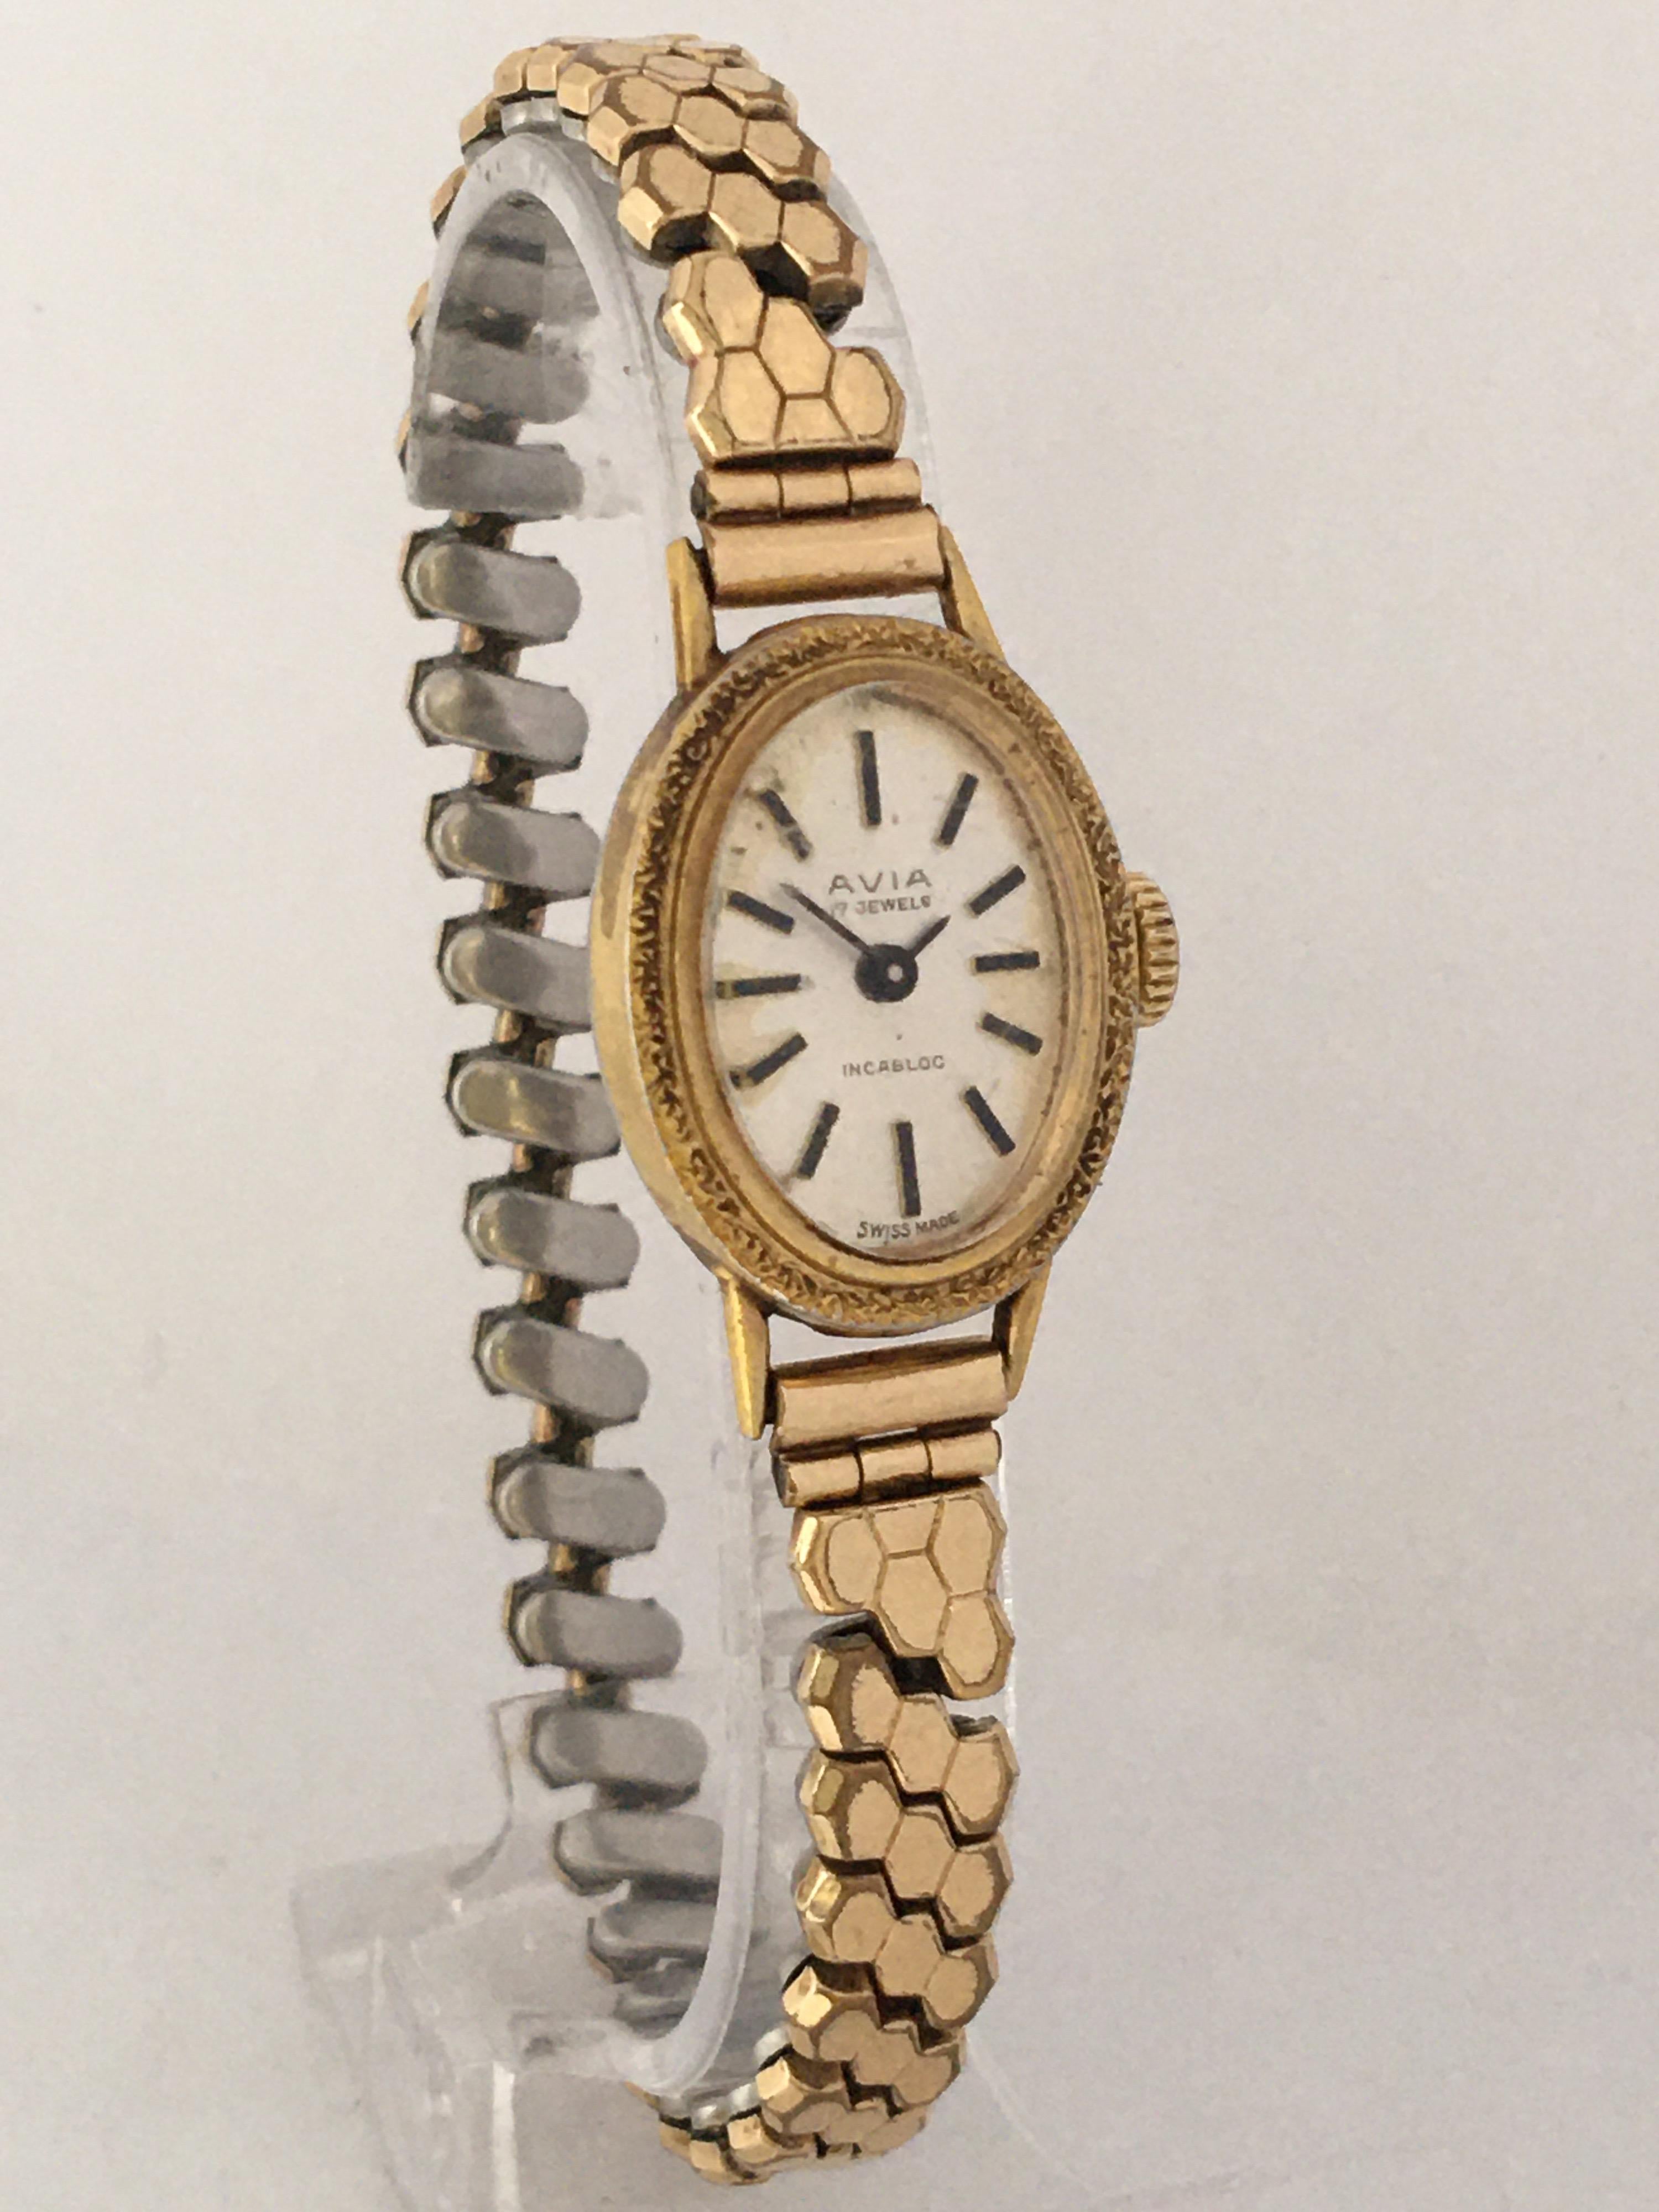 10K Rolled Gold/Stainless Steel Back Vintage 1970s Avia Ladies Mechanical Watch 6